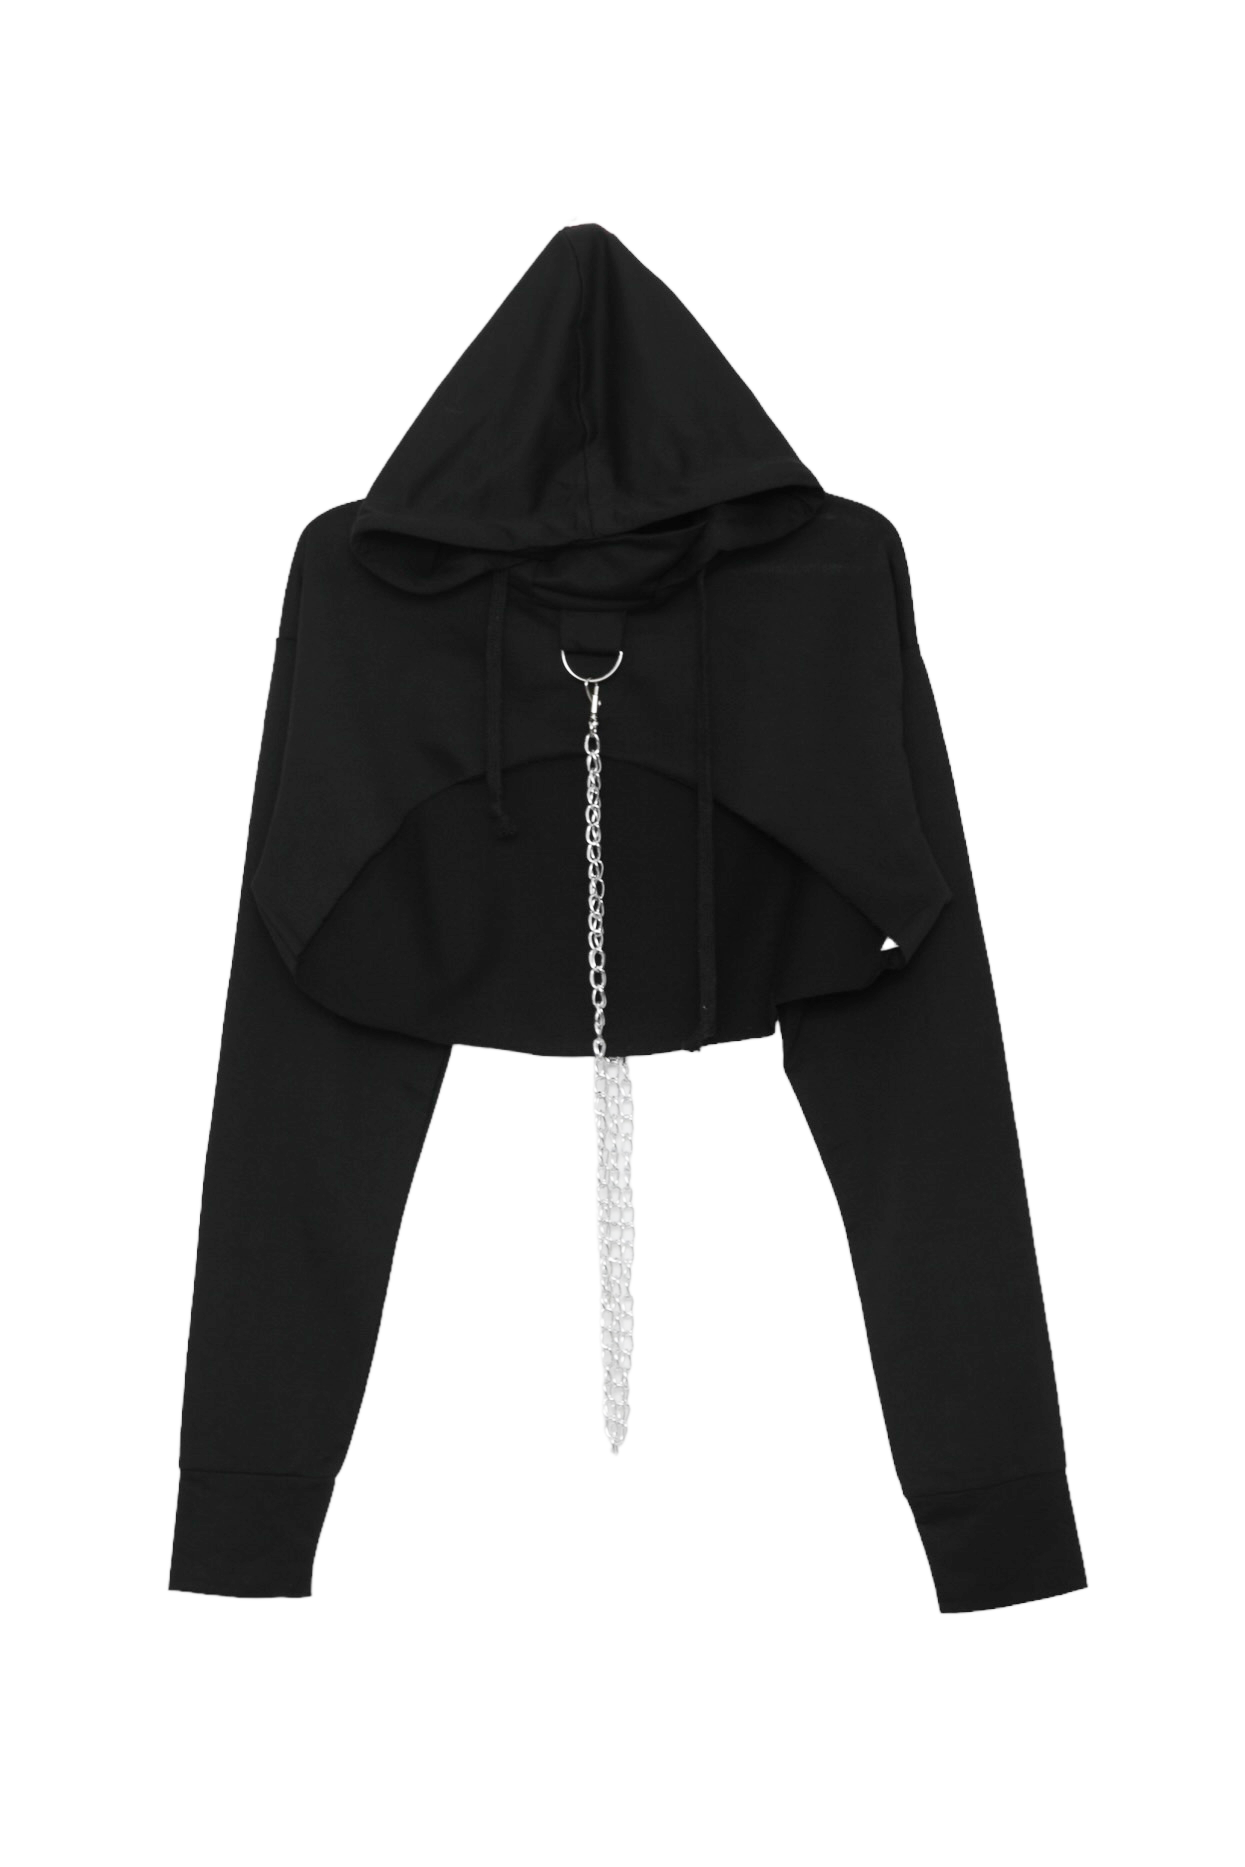 CHAIN CODE CROPPED HOODIE